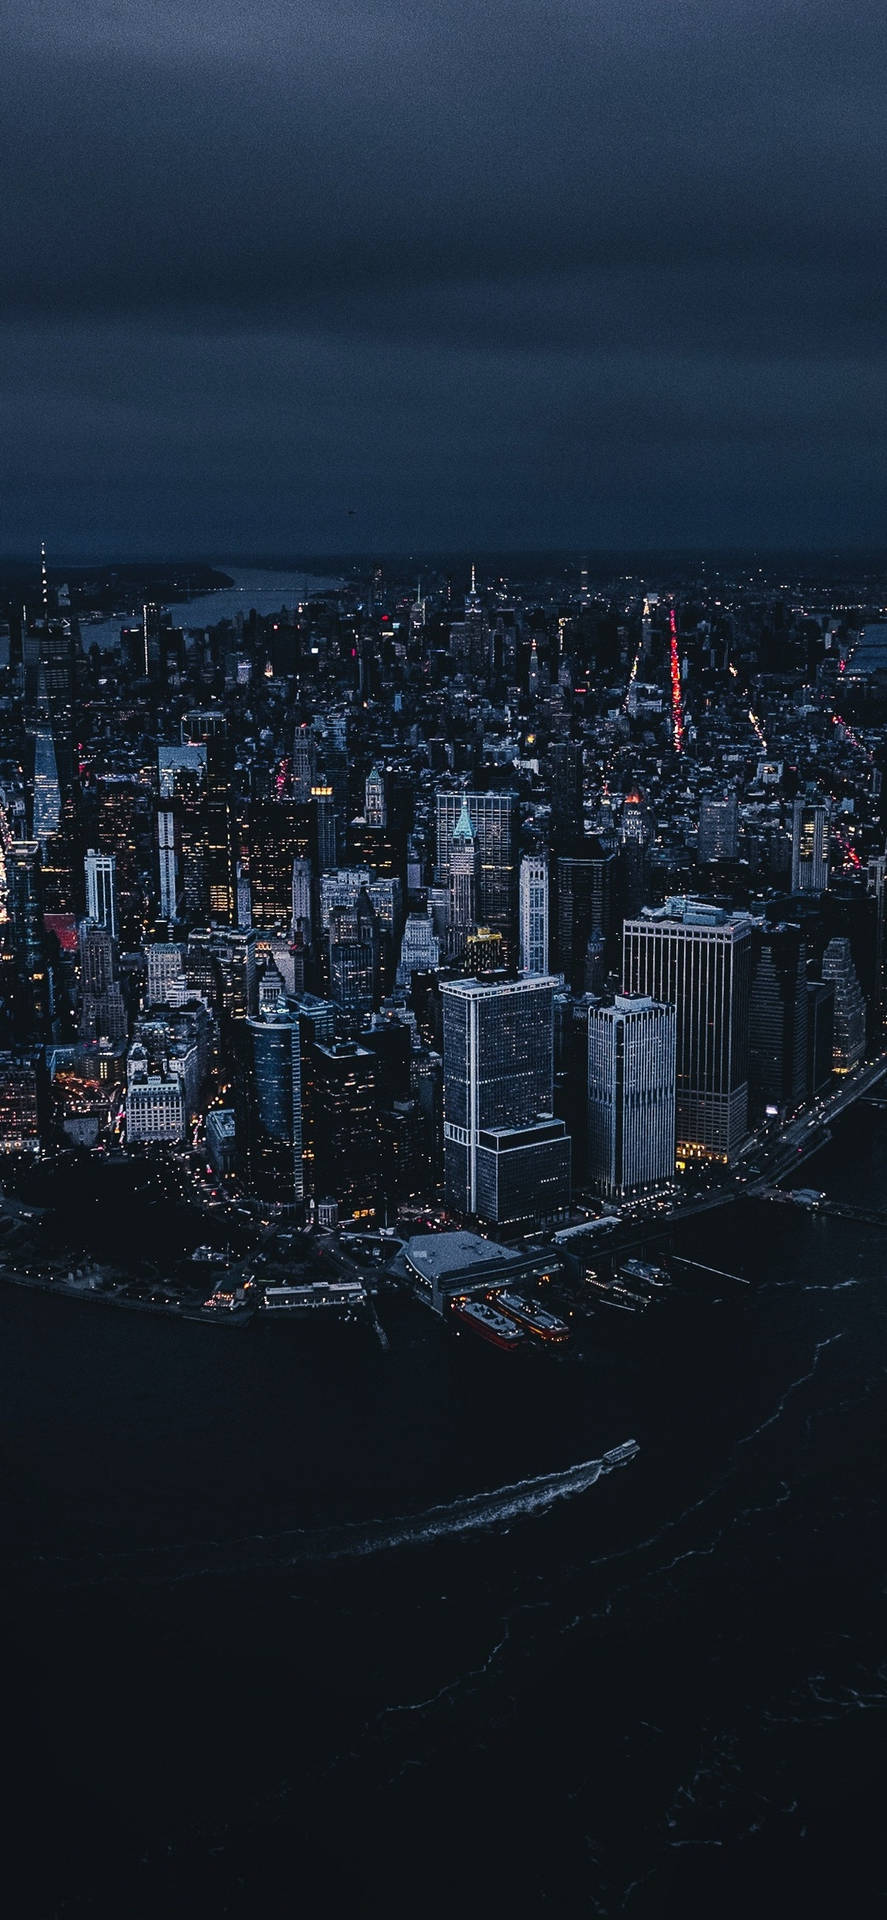 New York City skyline in all its glory Wallpaper